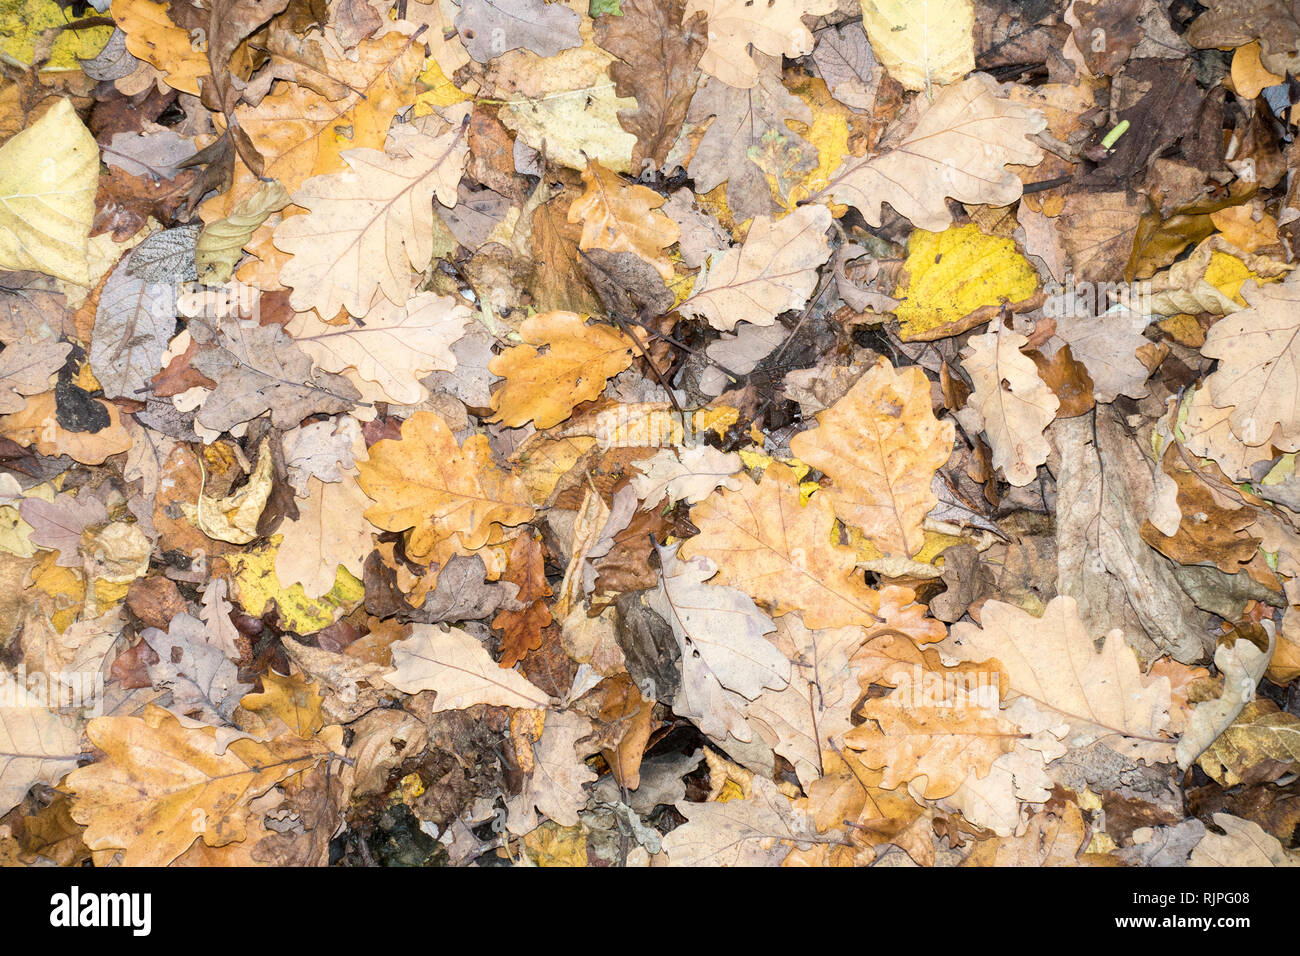 Multicoloured dead and decaying leaves on ground. Stock Photo